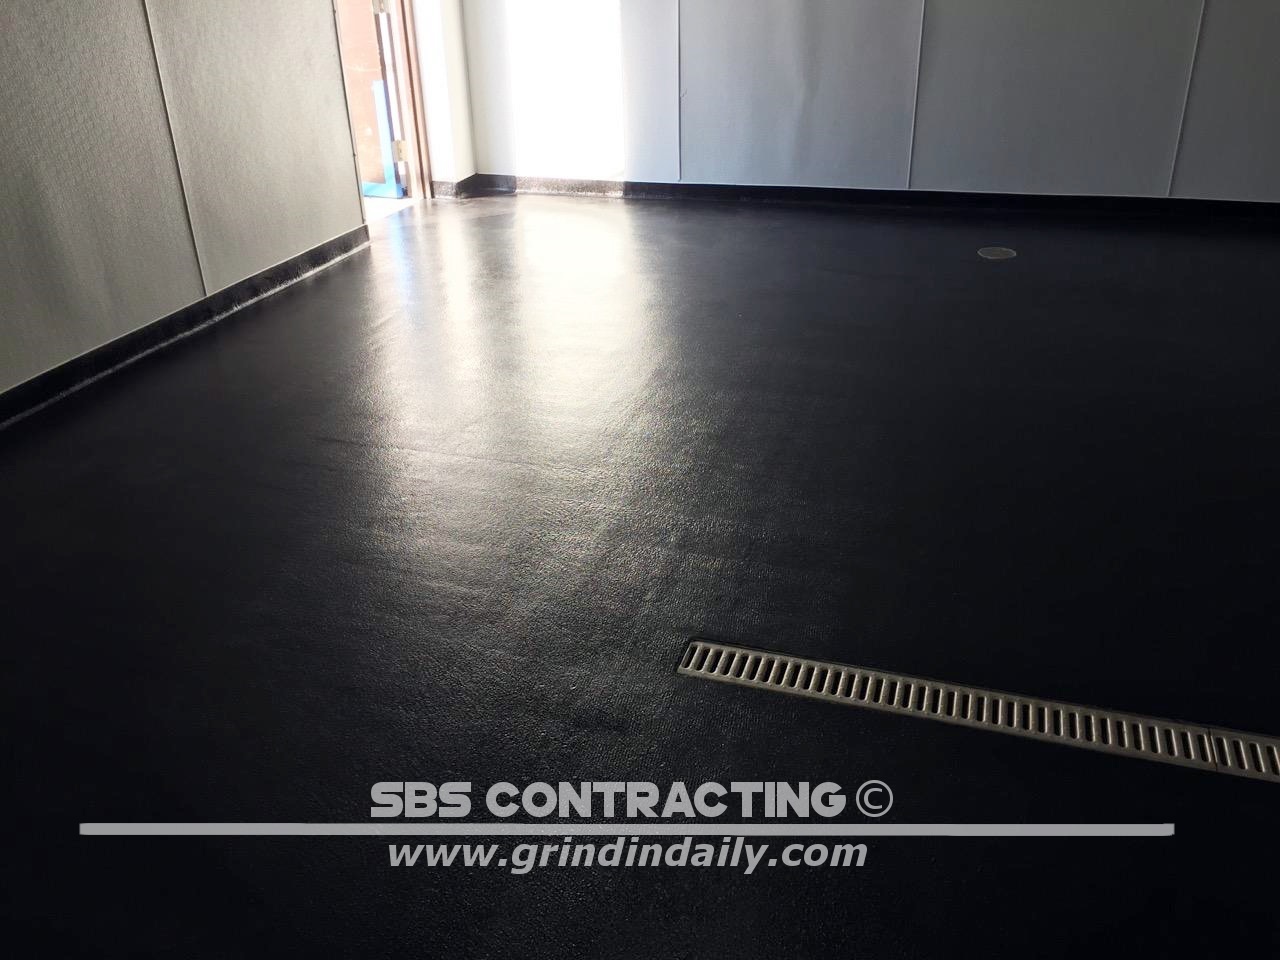 SBS-Contracting-Broadcast-Project-02-01